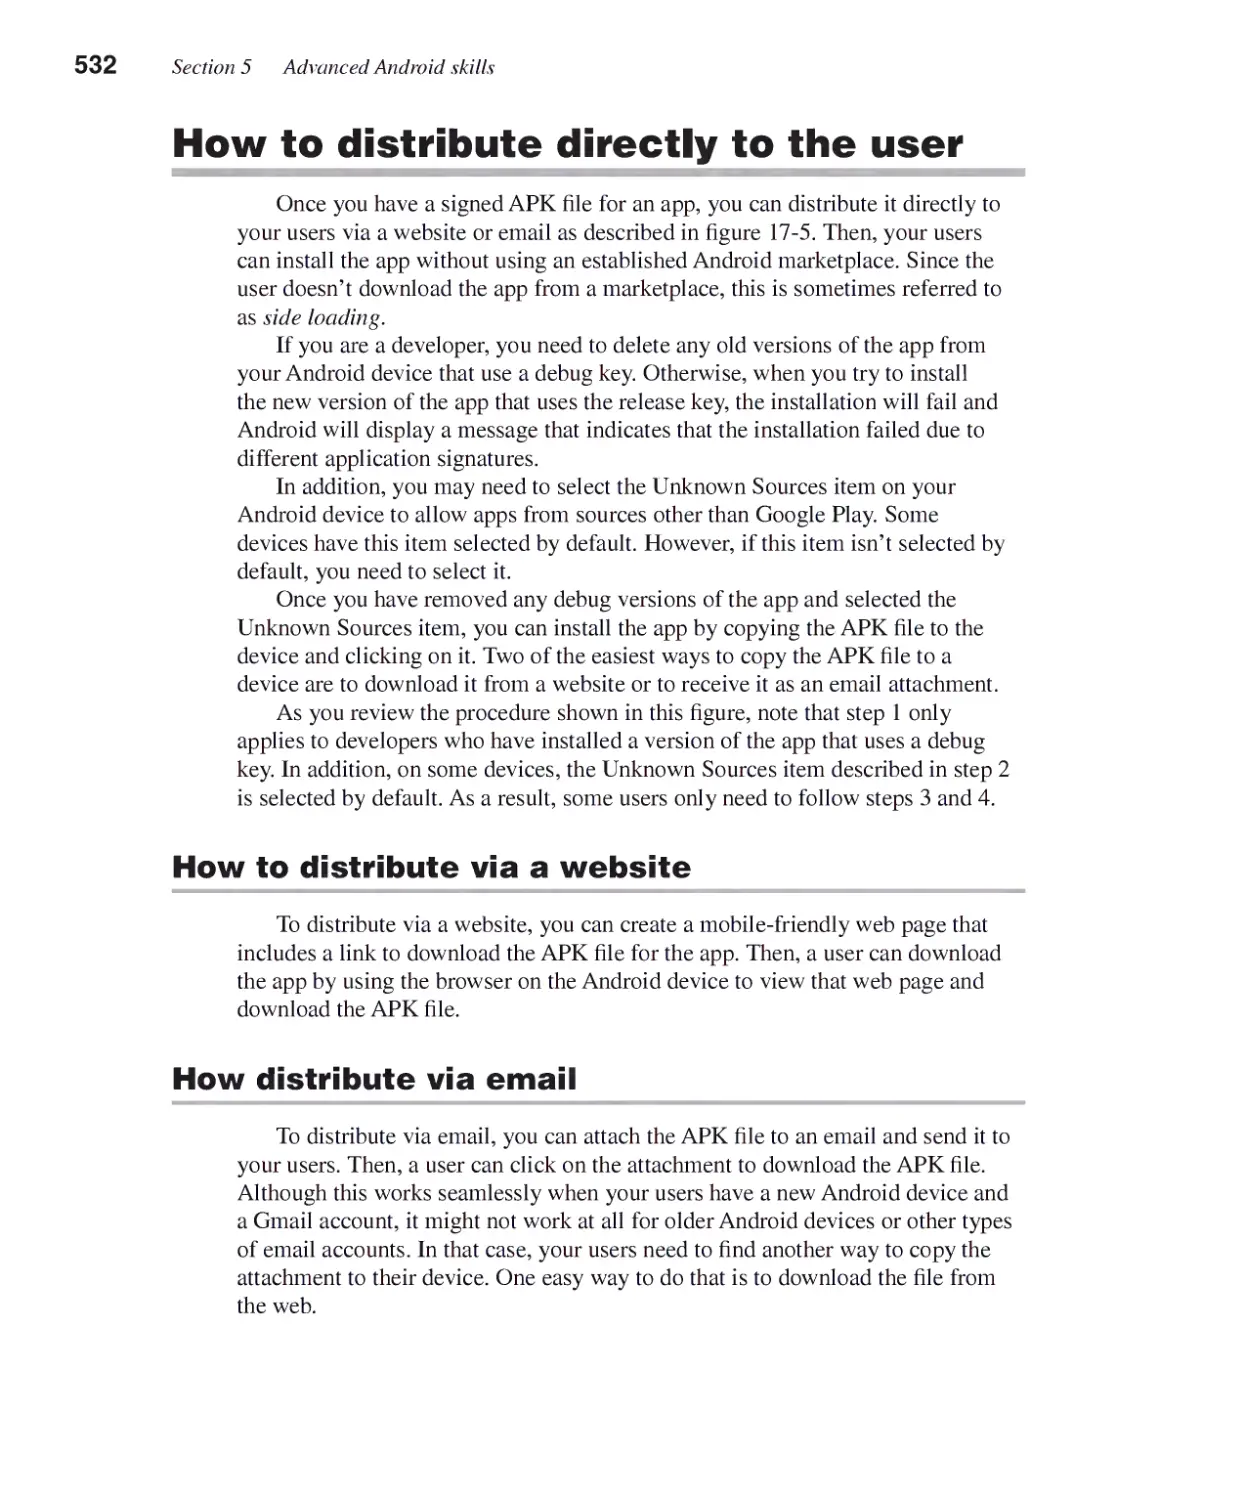 How to Distribute Directly to the User